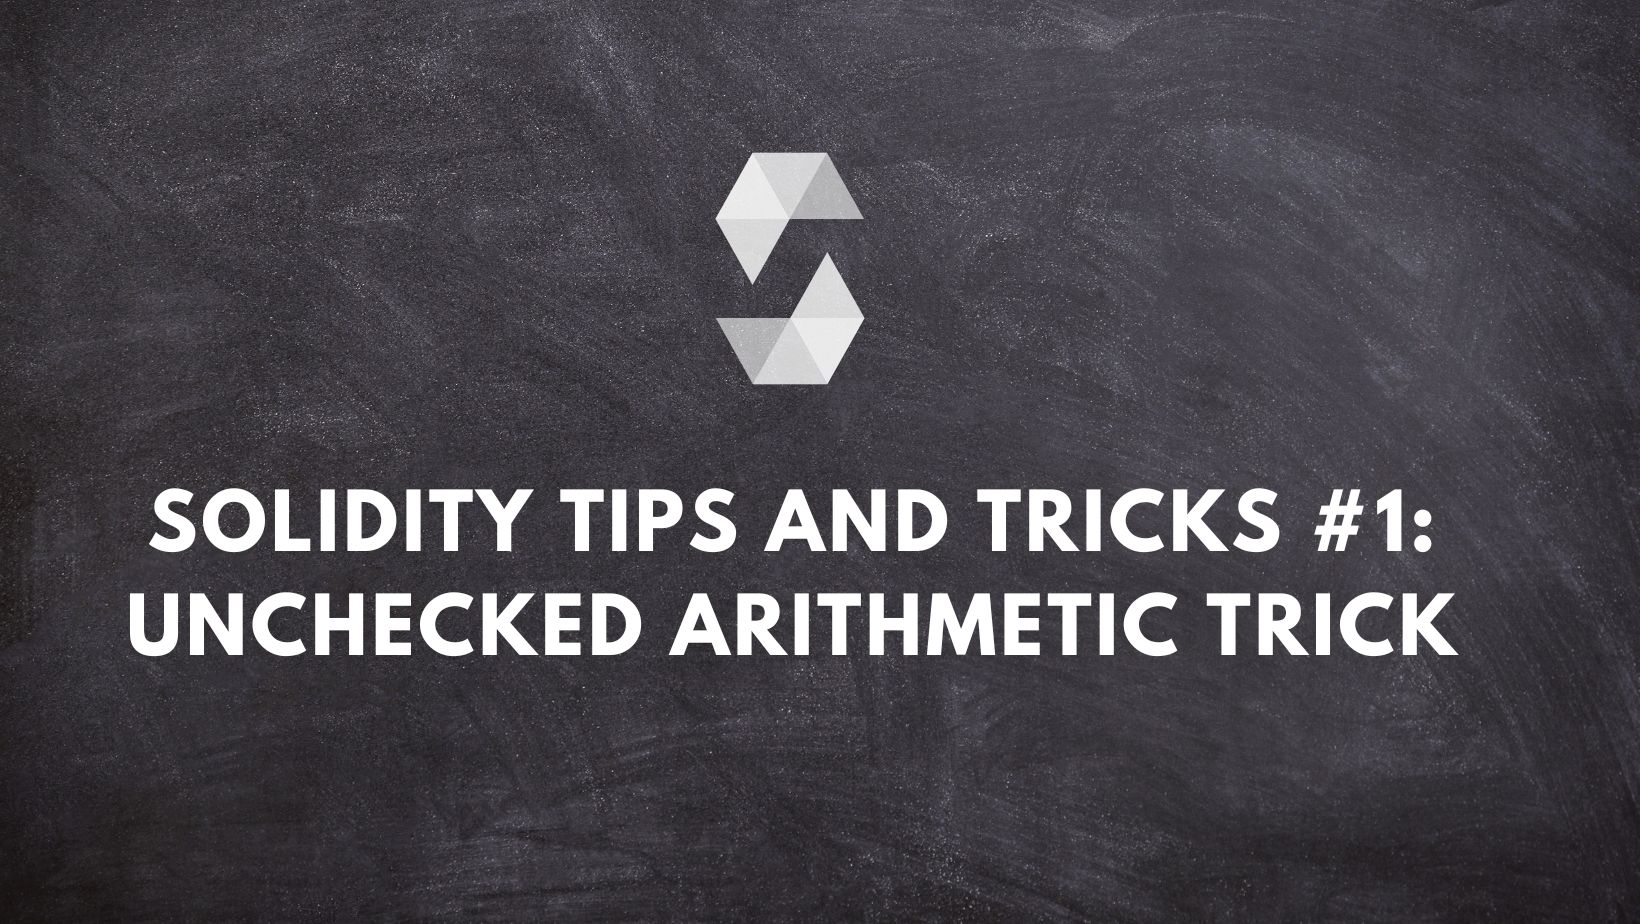 Solidity tips and tricks #1: Unchecked arithmetic trick